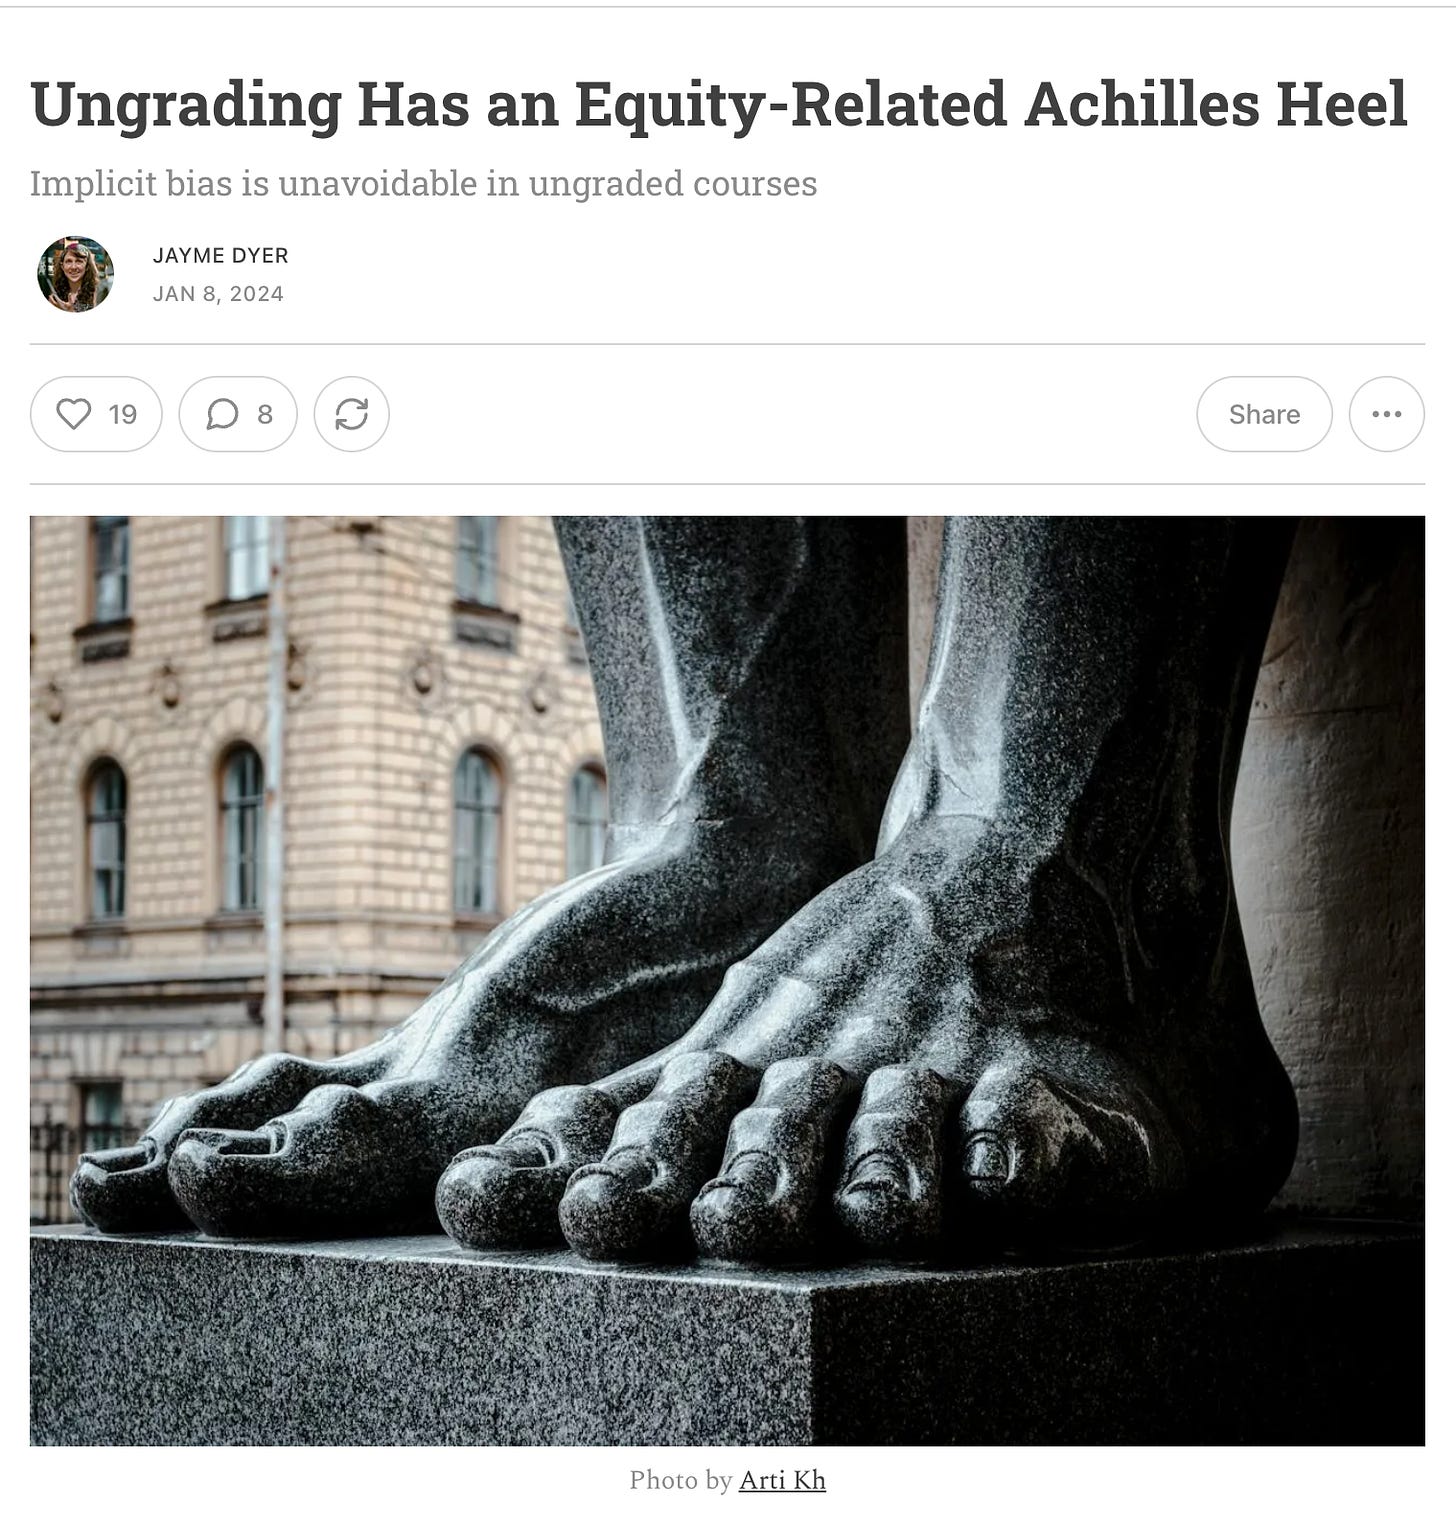 Screenshot of essay: Ungrading has an equity-related Achilles Heel, with picture of stone feet. By Jayme Dyer